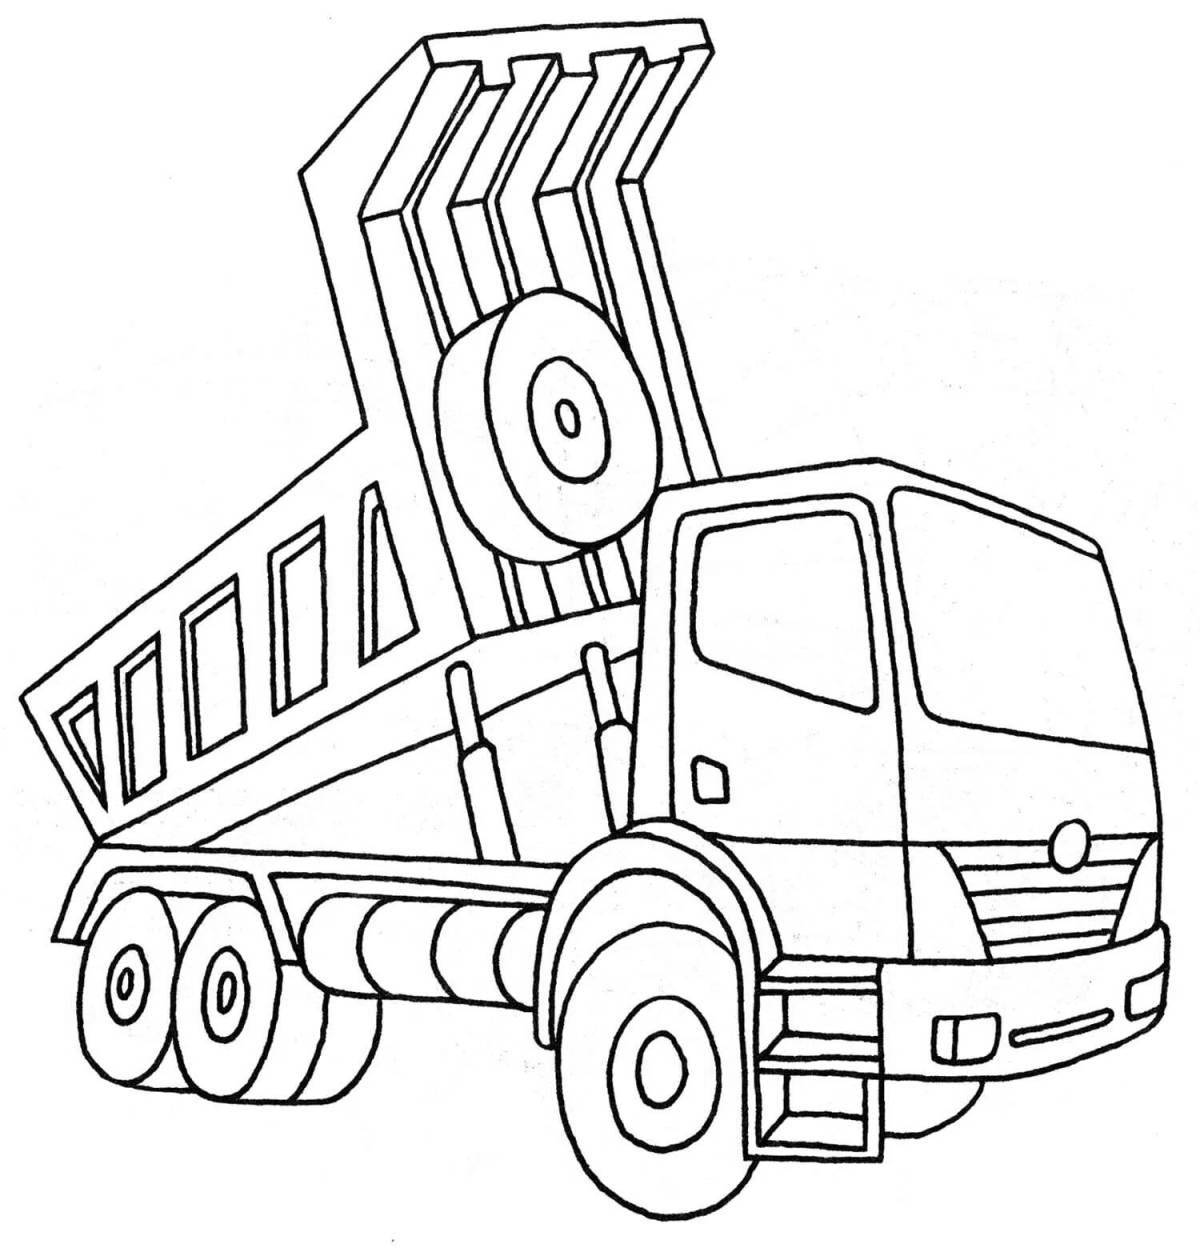 Cute construction vehicle coloring book for kids